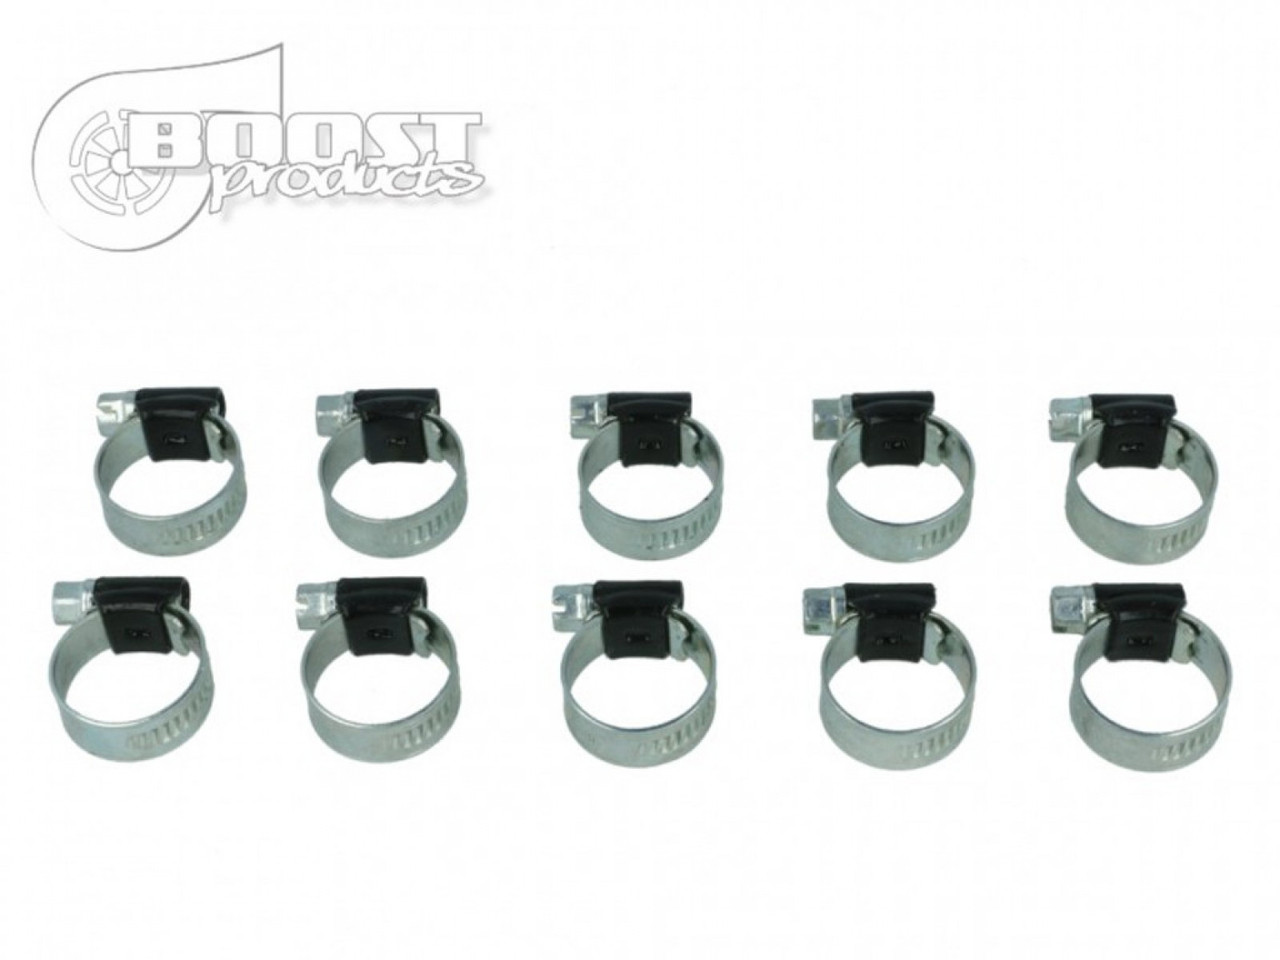 BOOST Products 10 Pack HD Clamps, Black, 32-44mm (1-17/64 - 1-47/64") Range (BOP-SC-SW-3244-10)